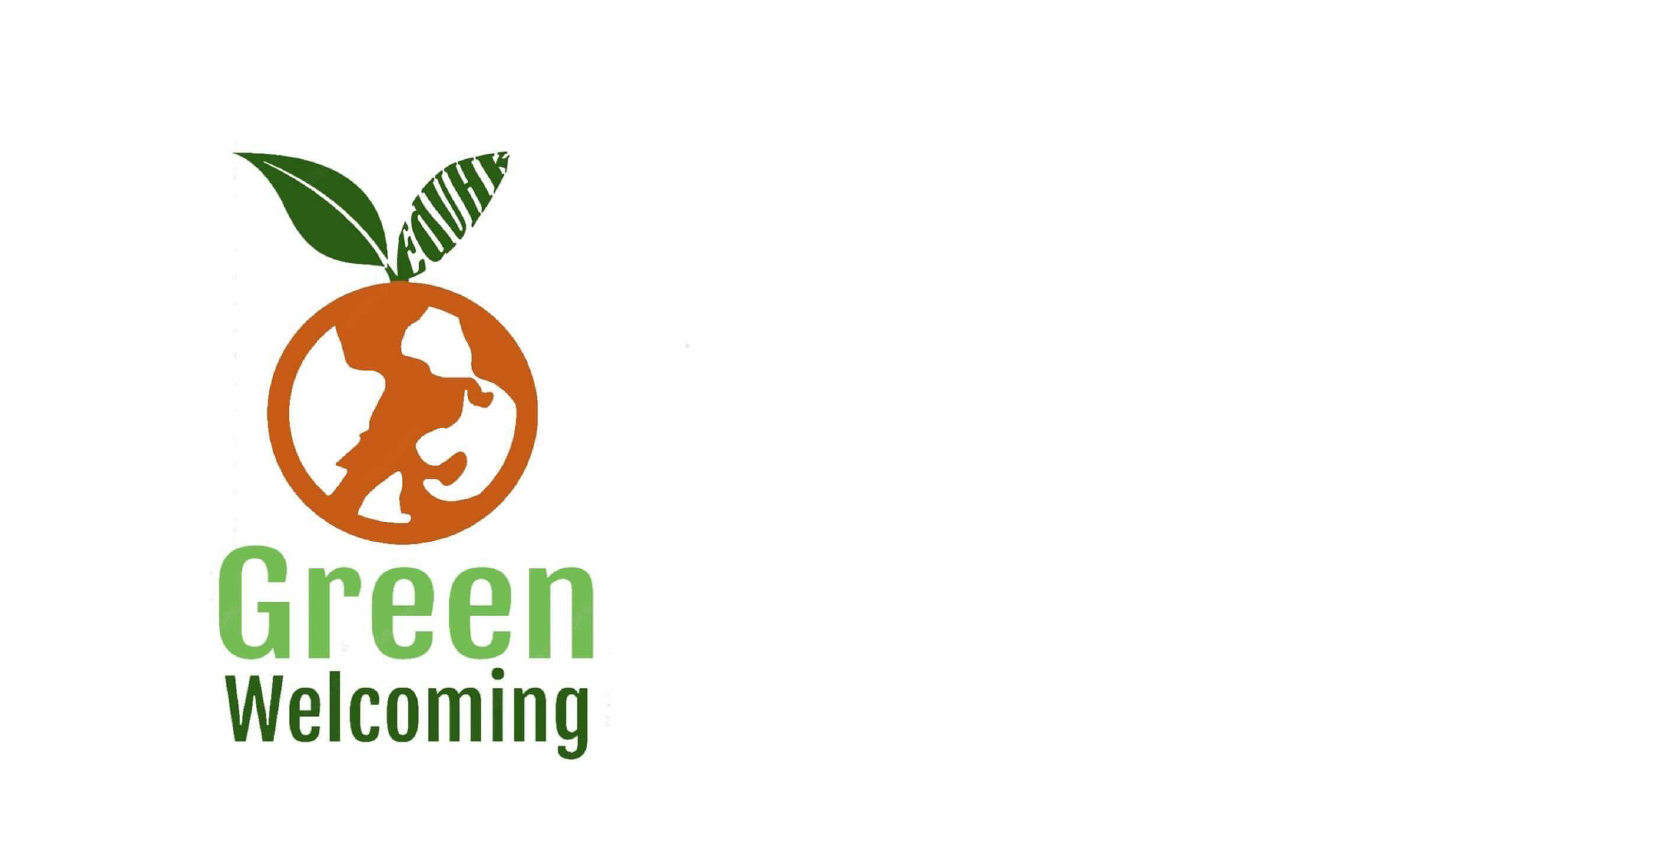 Image of Green Welcoming